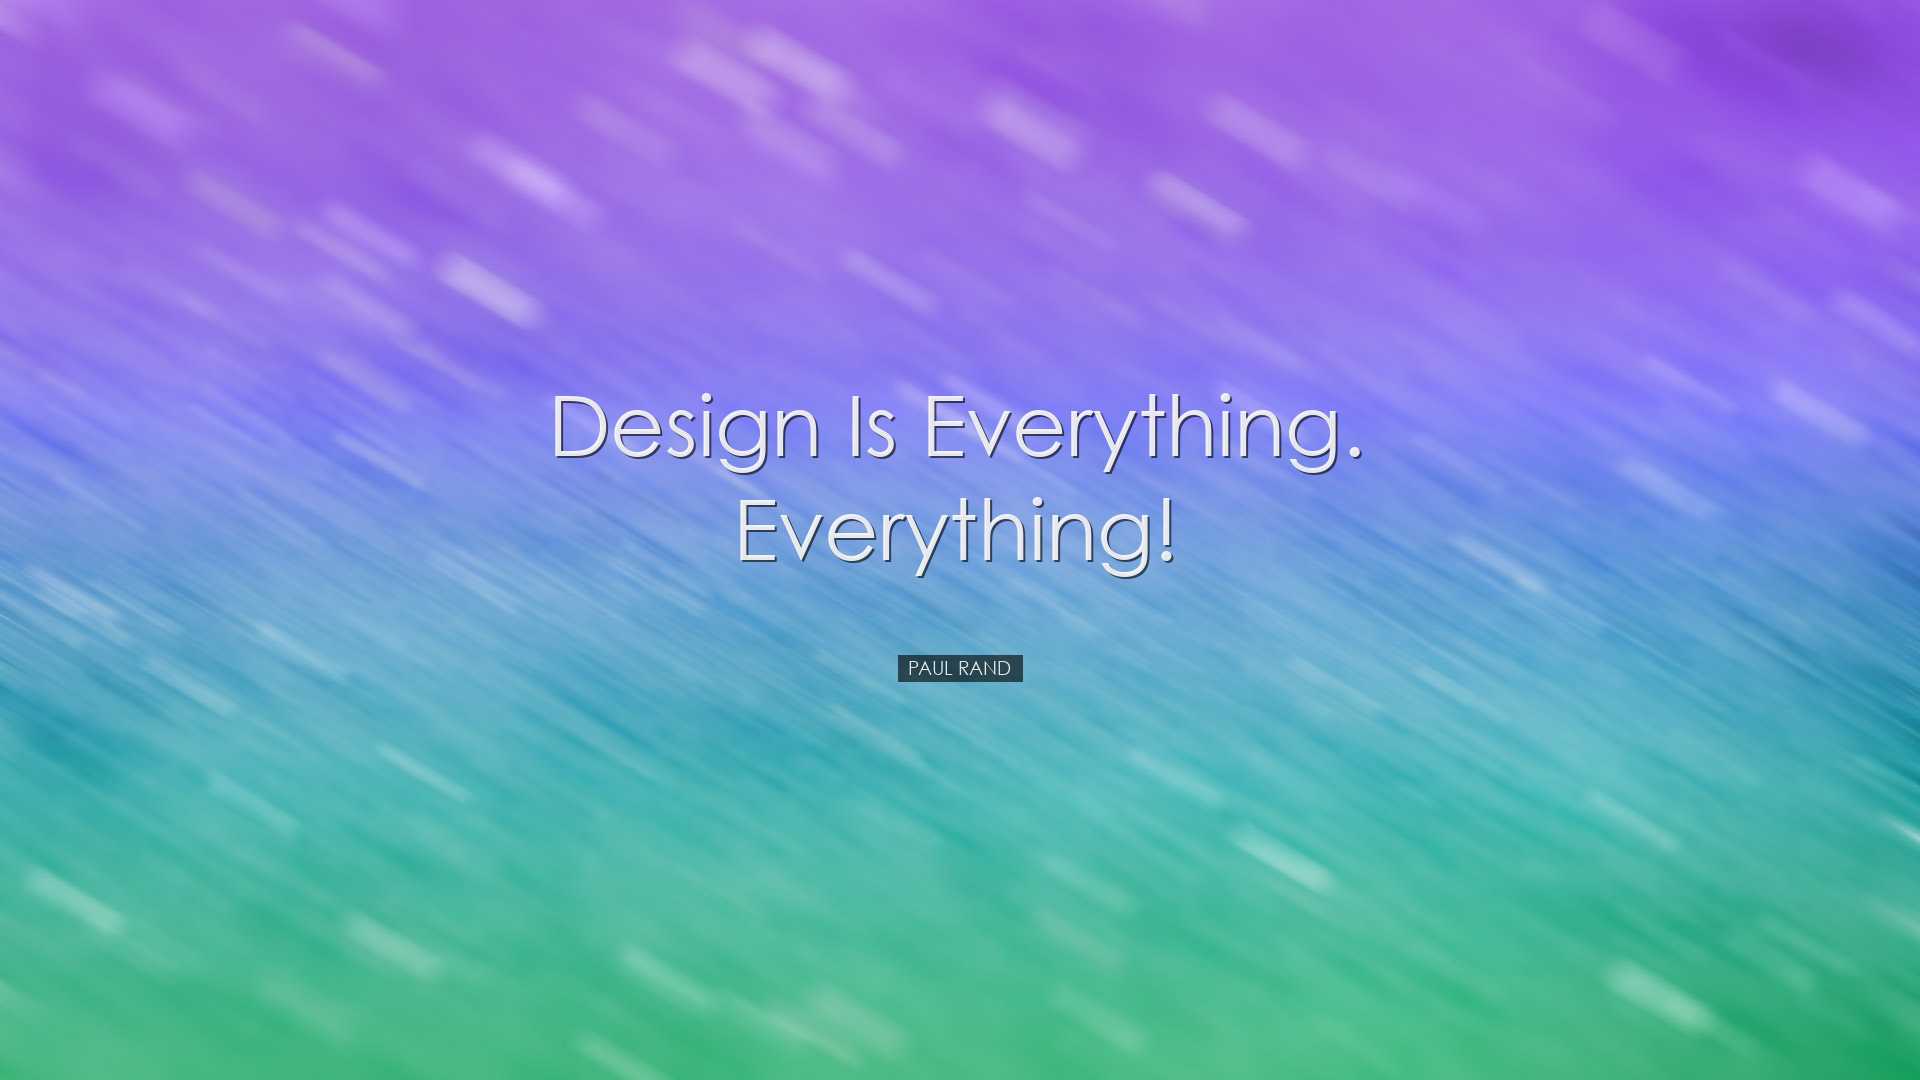 Design is everything. Everything! - Paul Rand